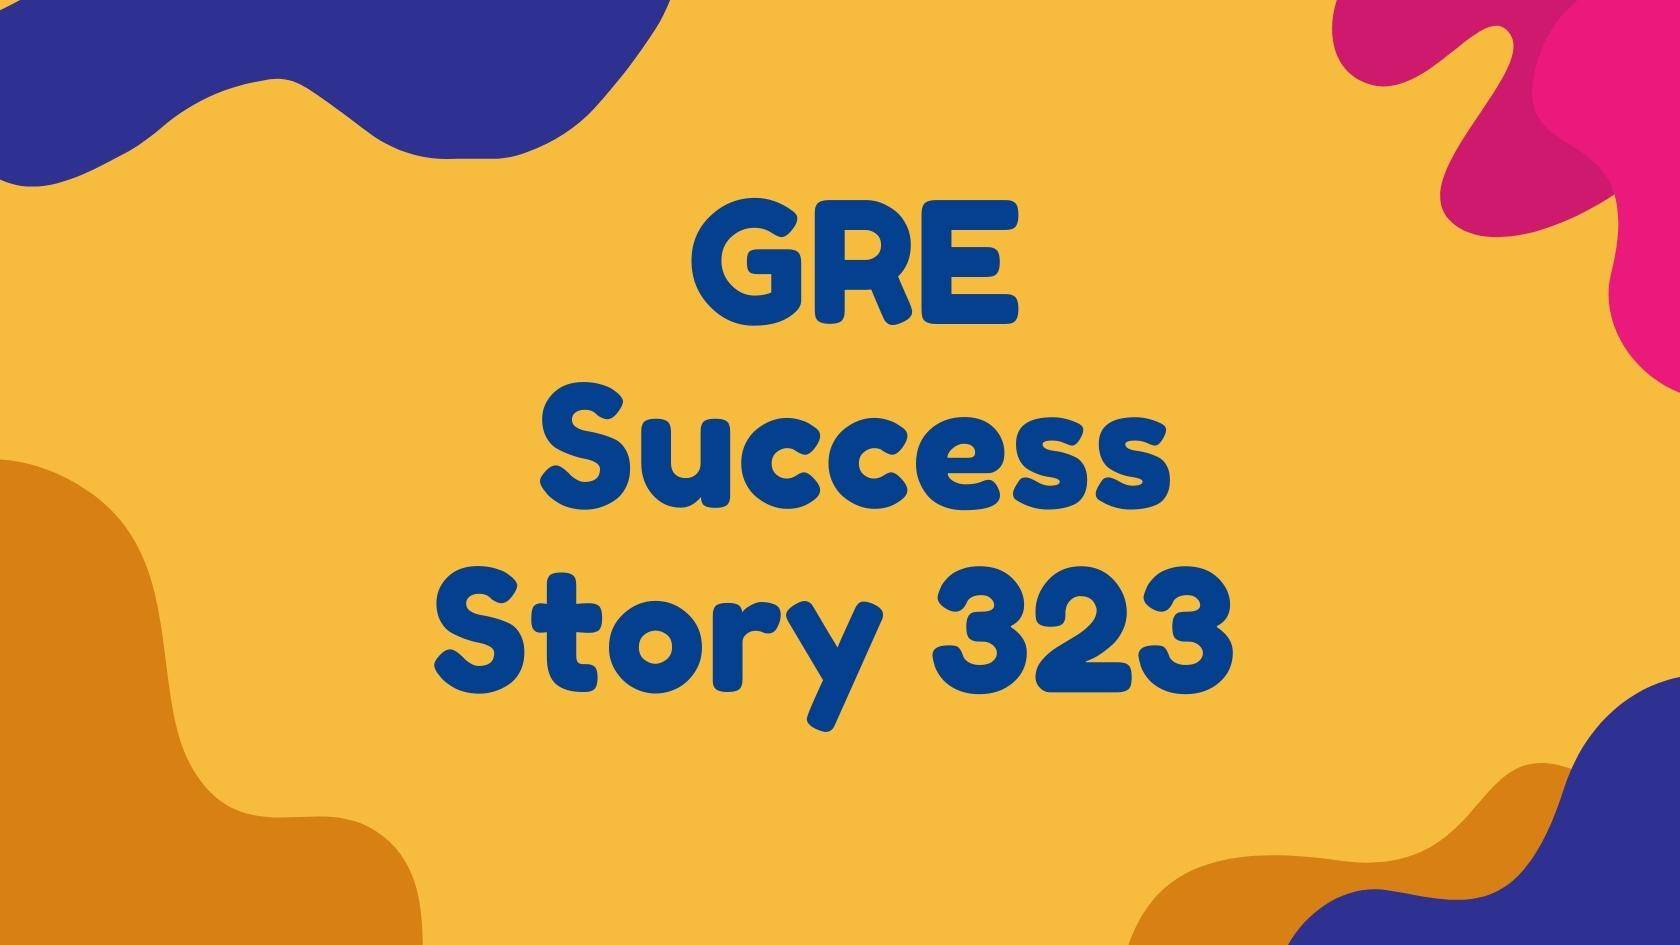 GRE Success Story 323